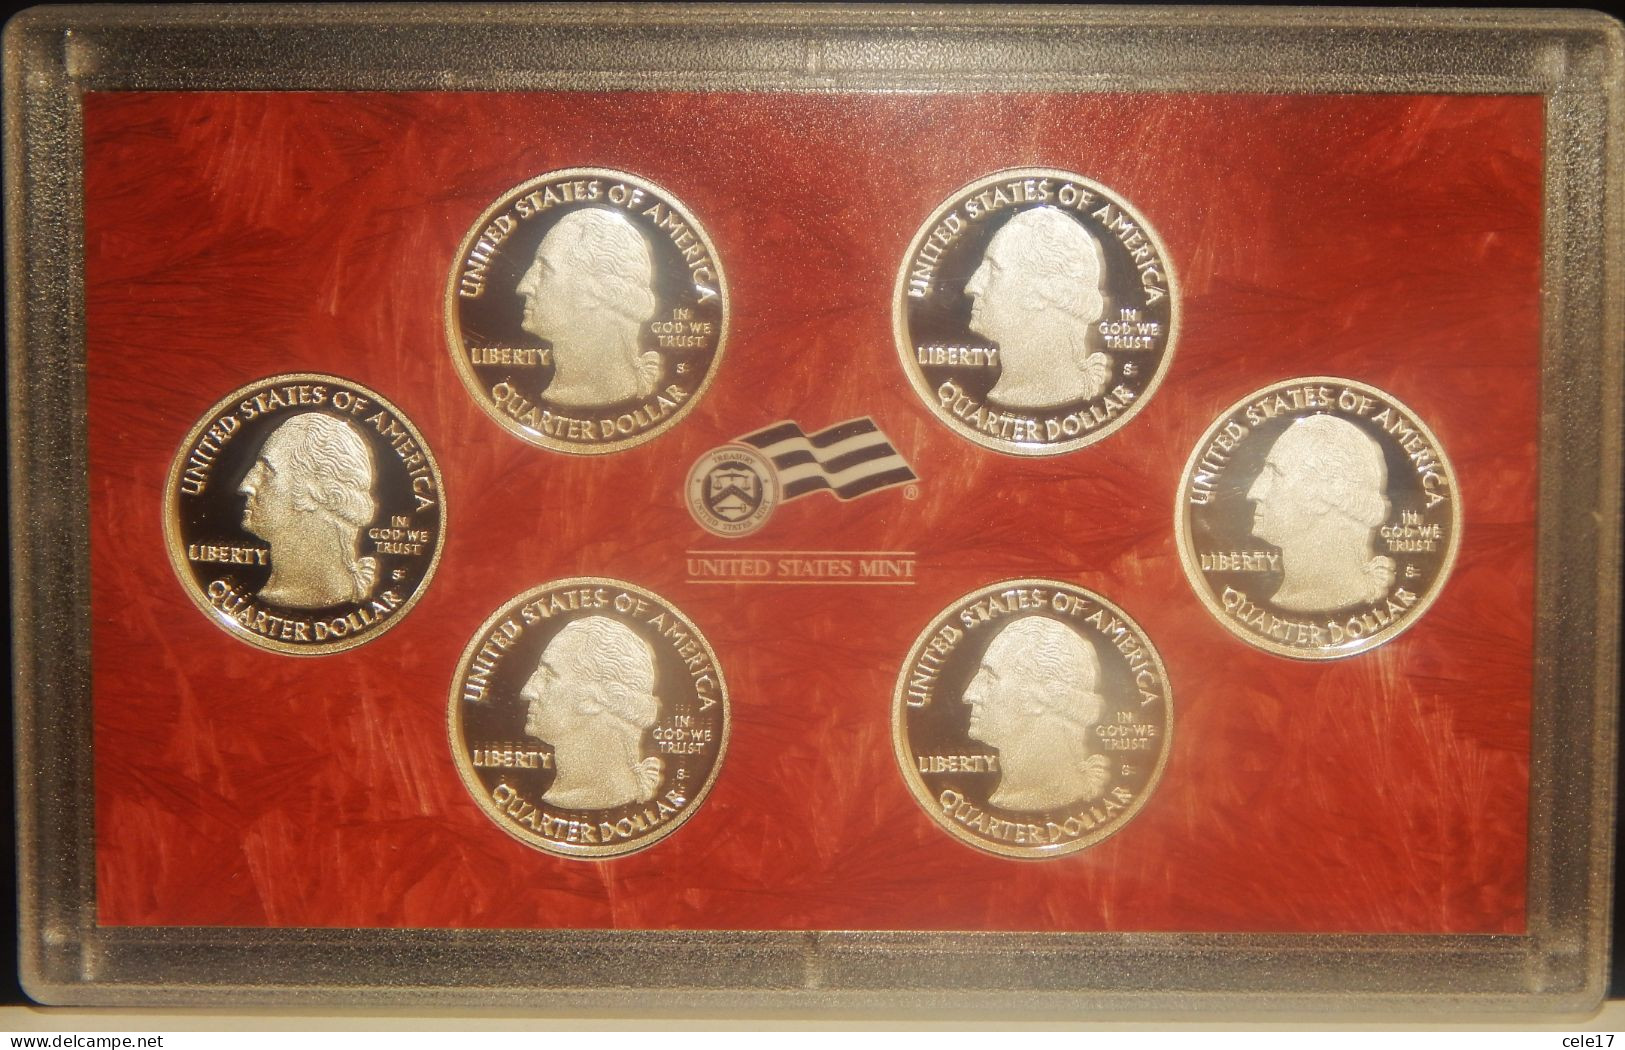 UNITED STATE MINT SILVER PROOF SET 2009